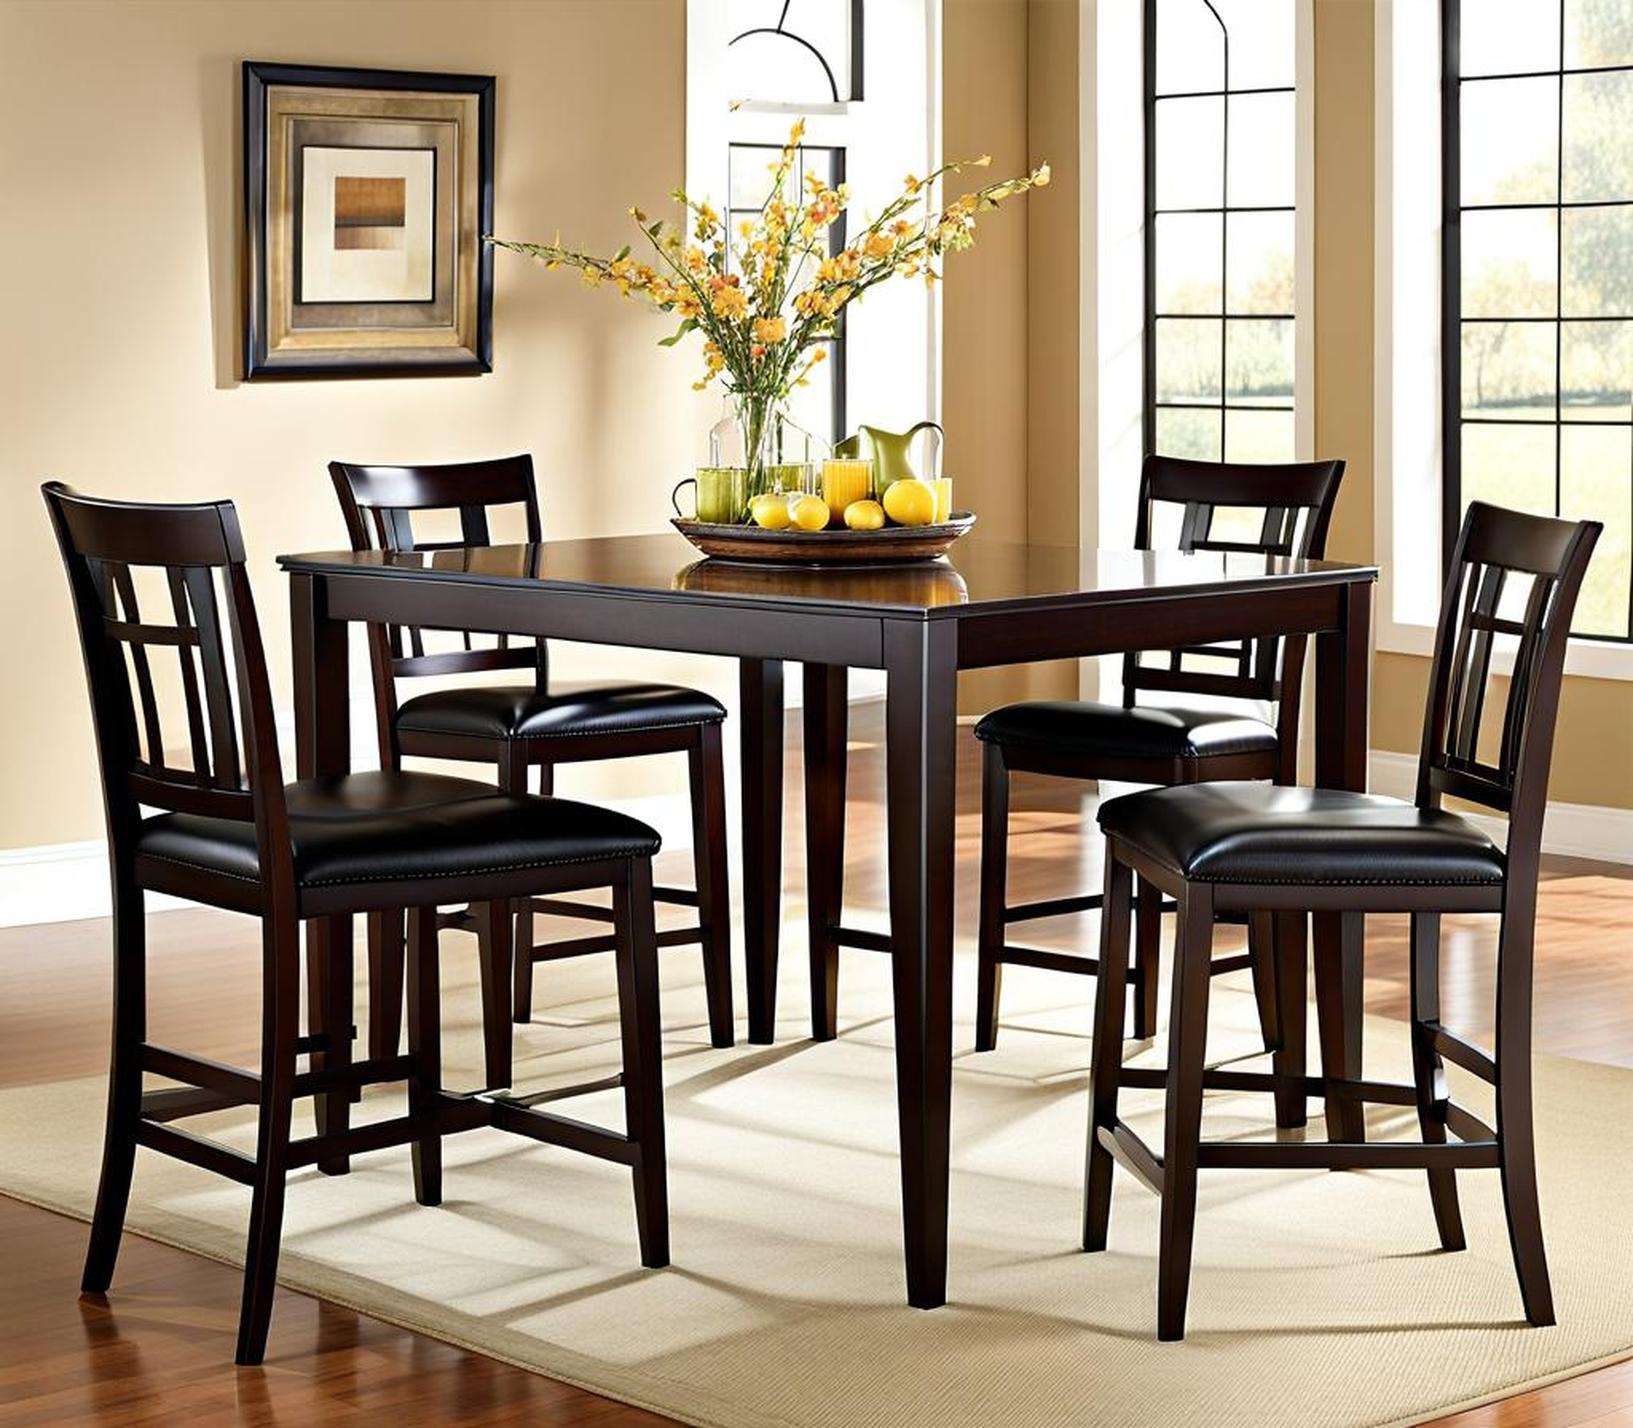 lennox counter-height dining table and 4 stools